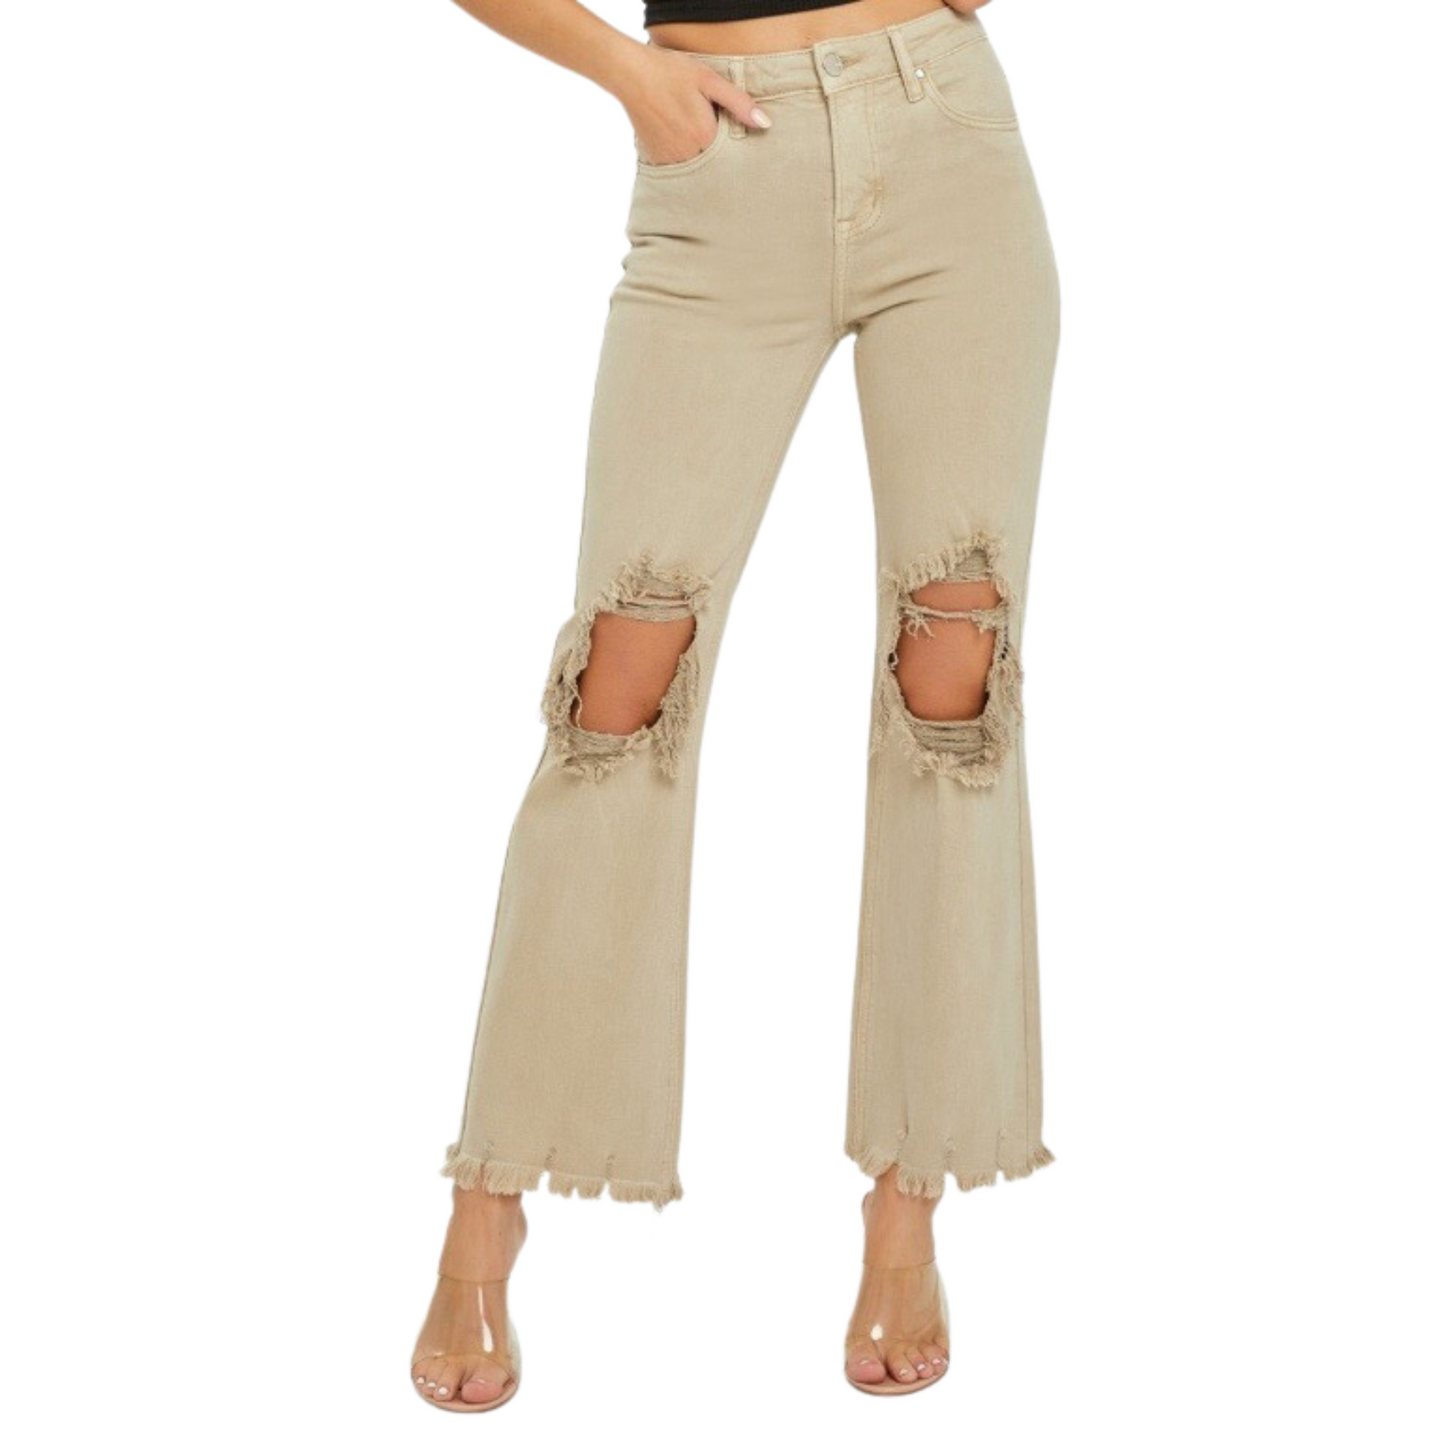 High Rise distressed jeans in khaki